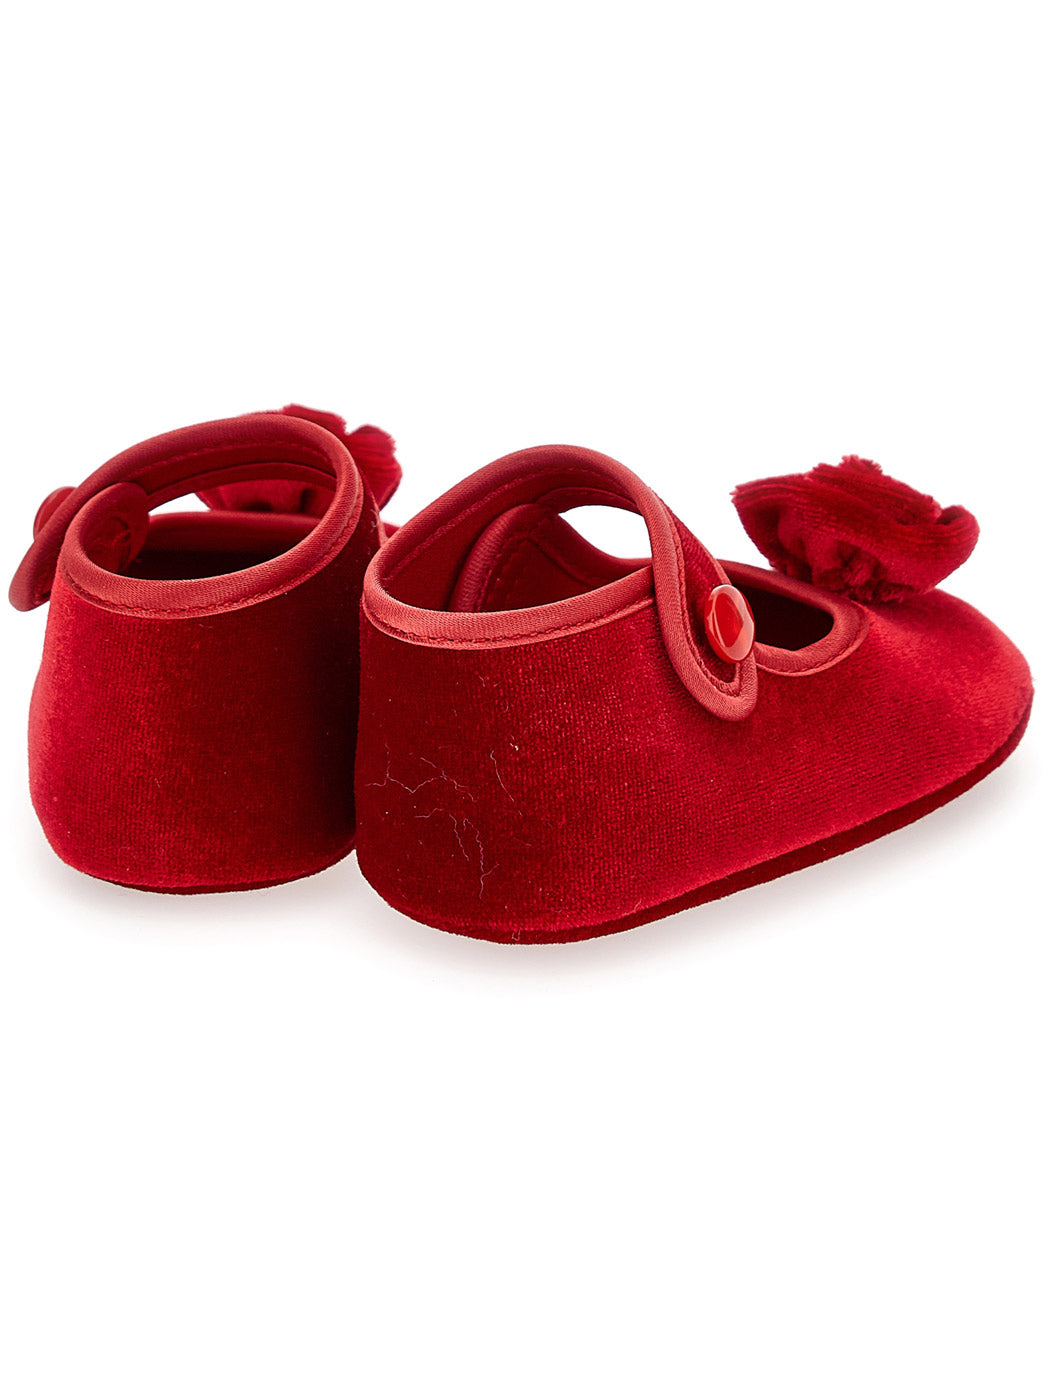 MONNALISA Chenille ballet booties for baby-red